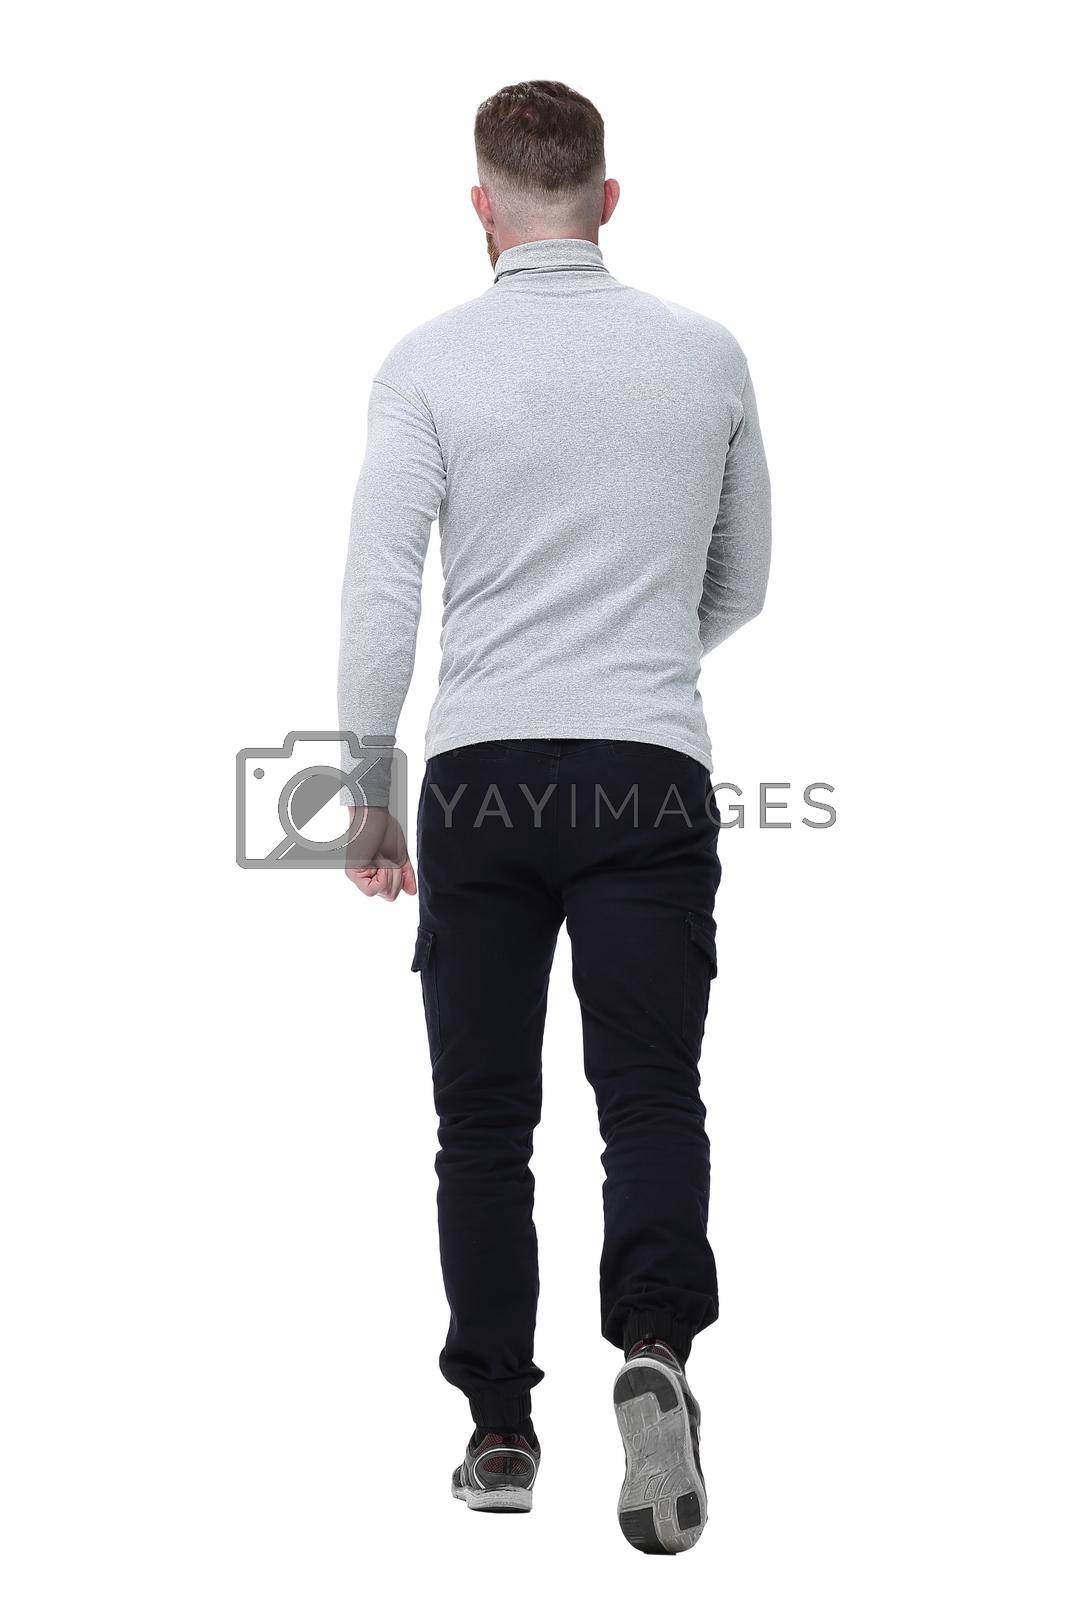 Royalty free image of rear view. a young man in a white pullover walks forward by asdf